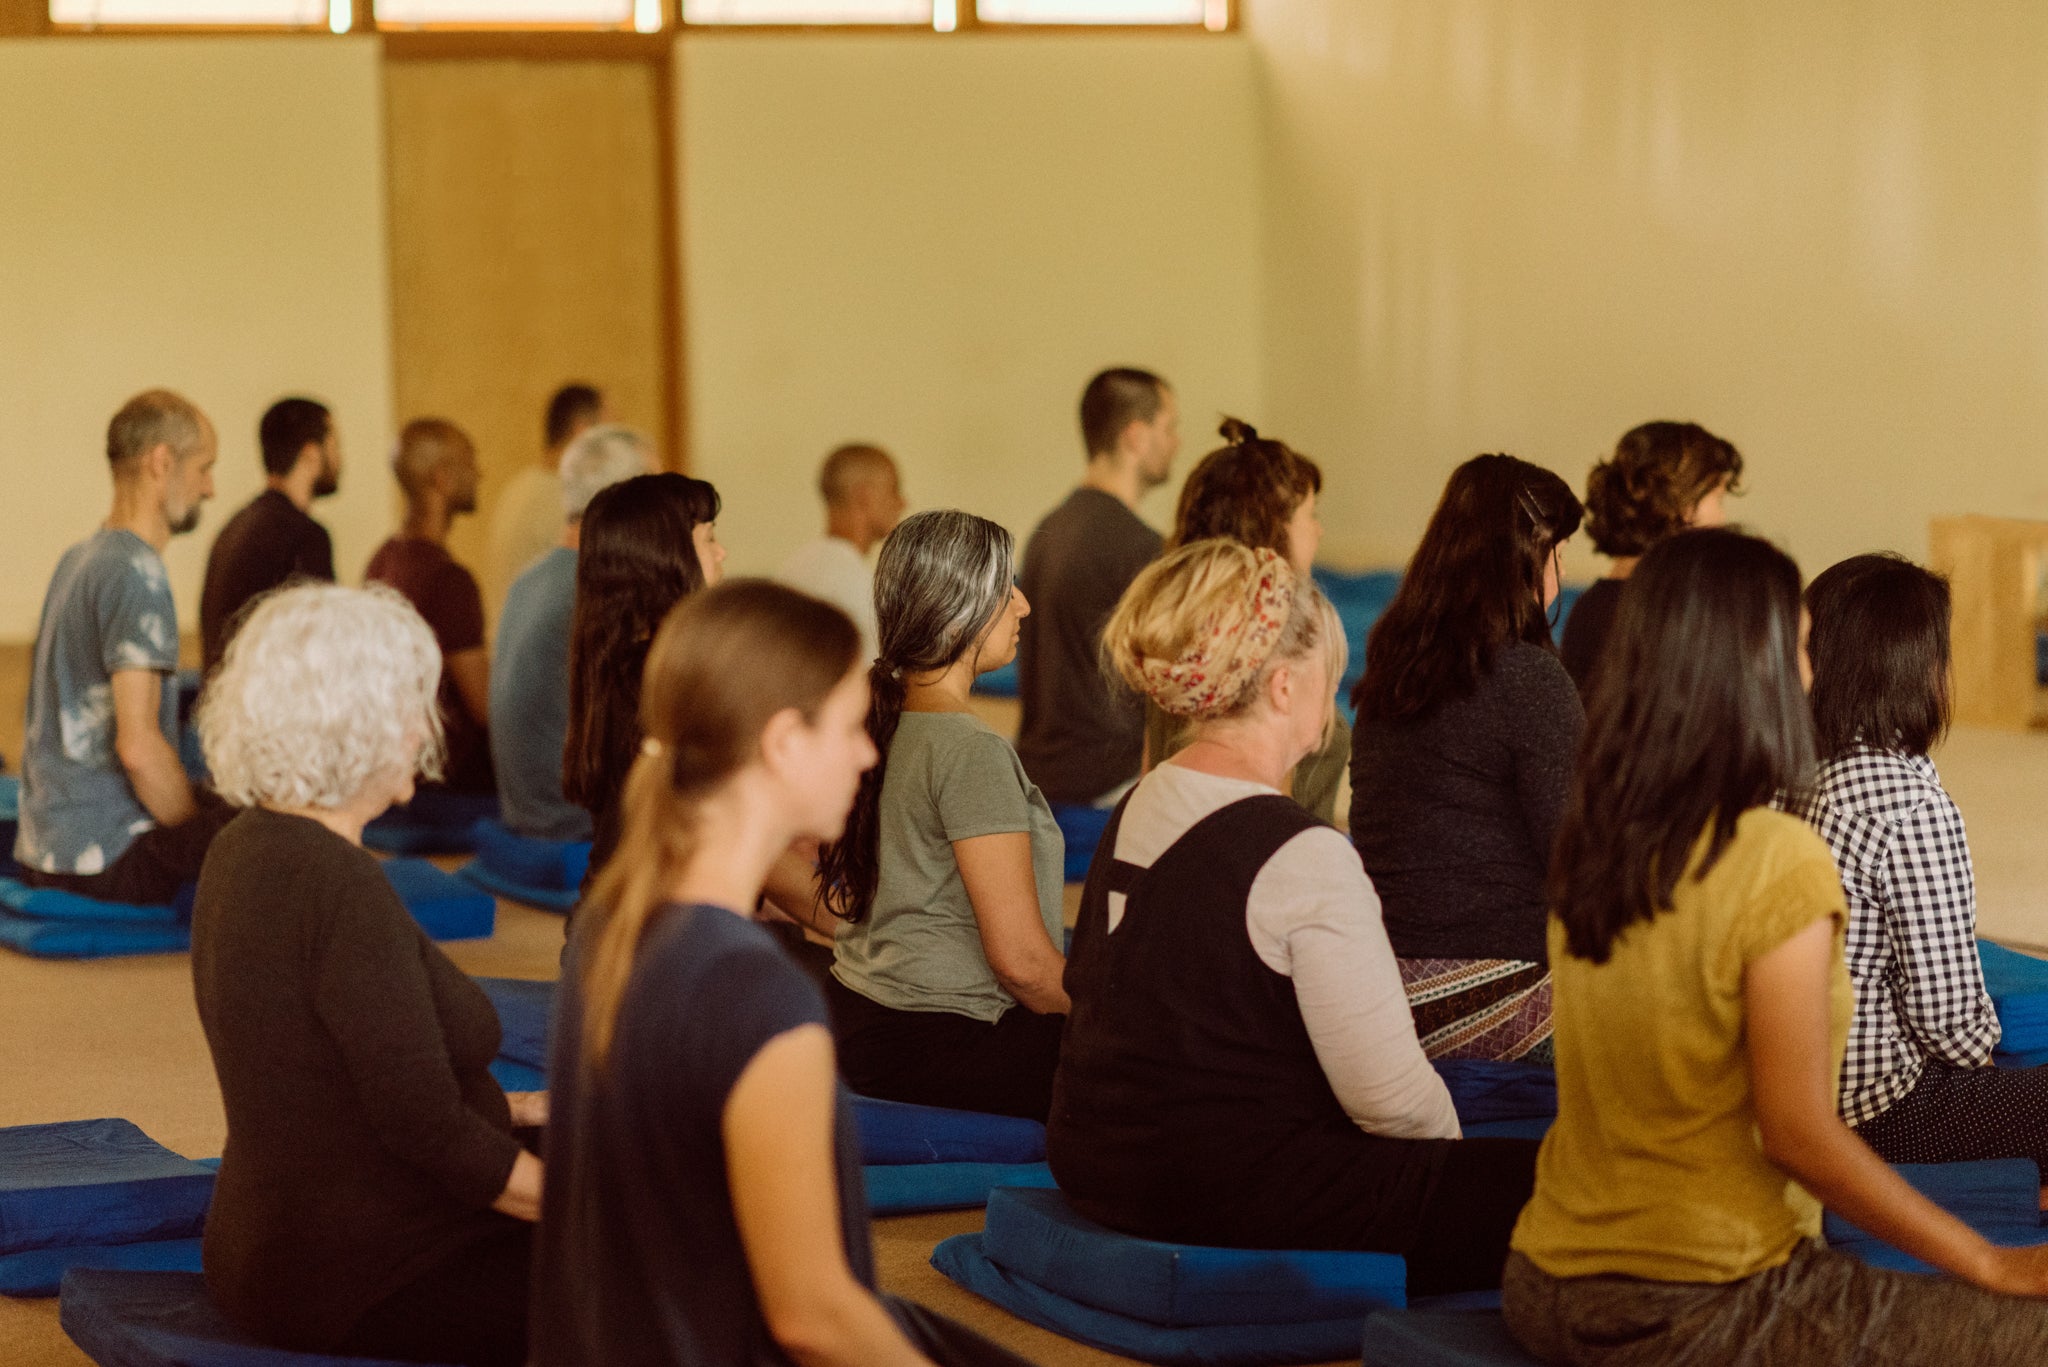 Men and women are separated, even in the meditation hall – just one of the many rules on a 10-day course